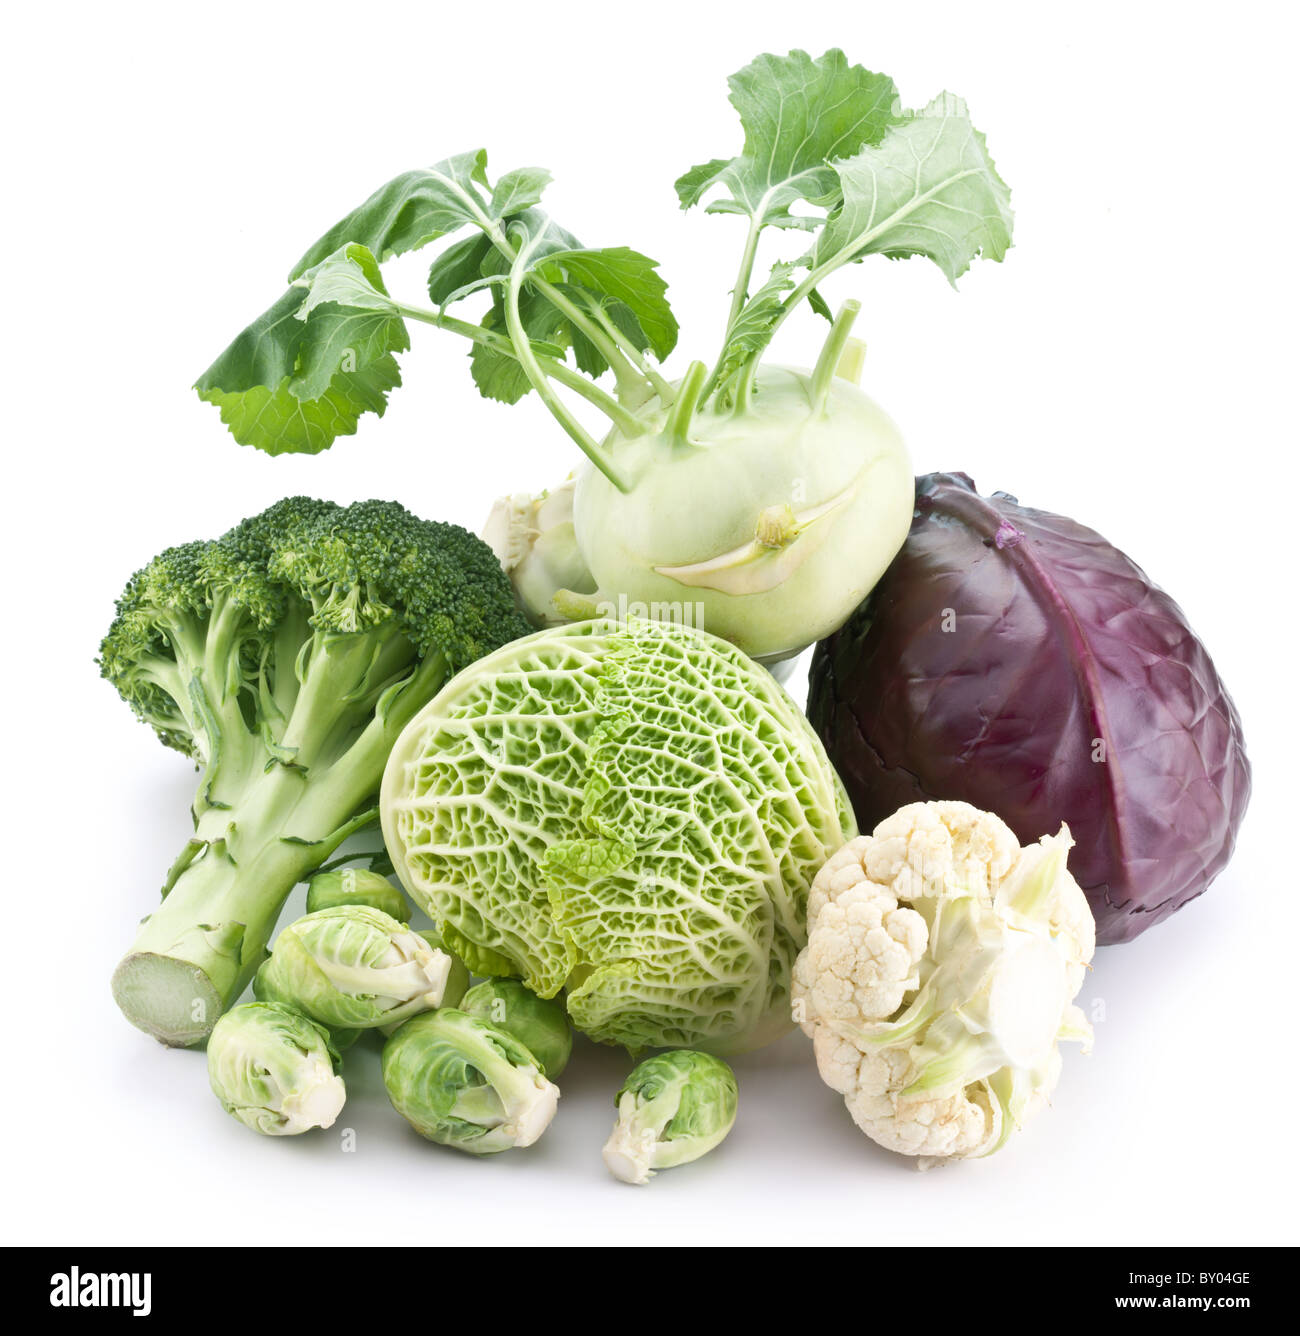 Collection of different varieties of cabbage on a white background. Stock Photo